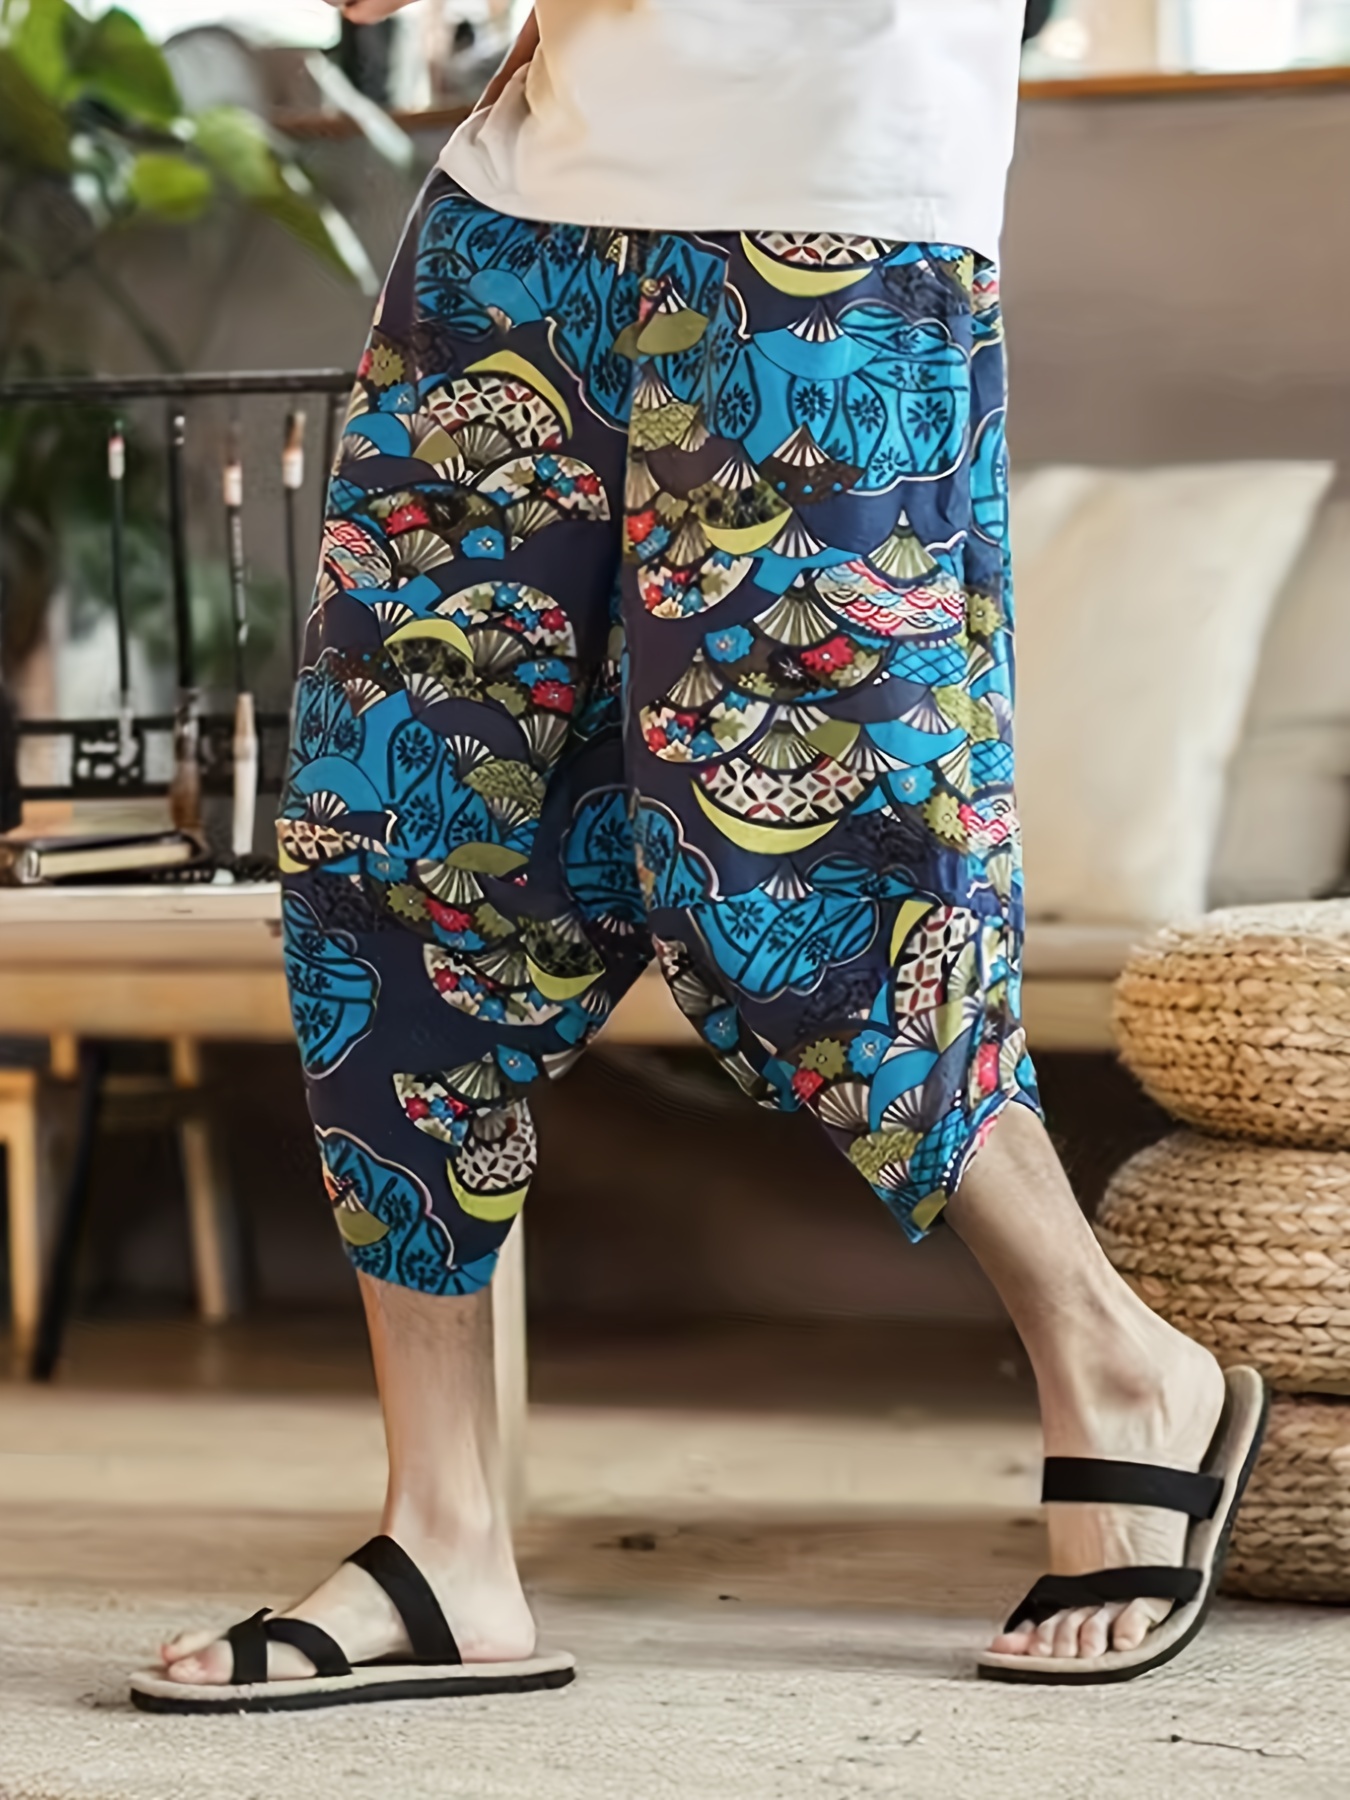 Men's Summer Casual Harem Pants With Print  Harem pants, Cotton harem pants,  Pants for women